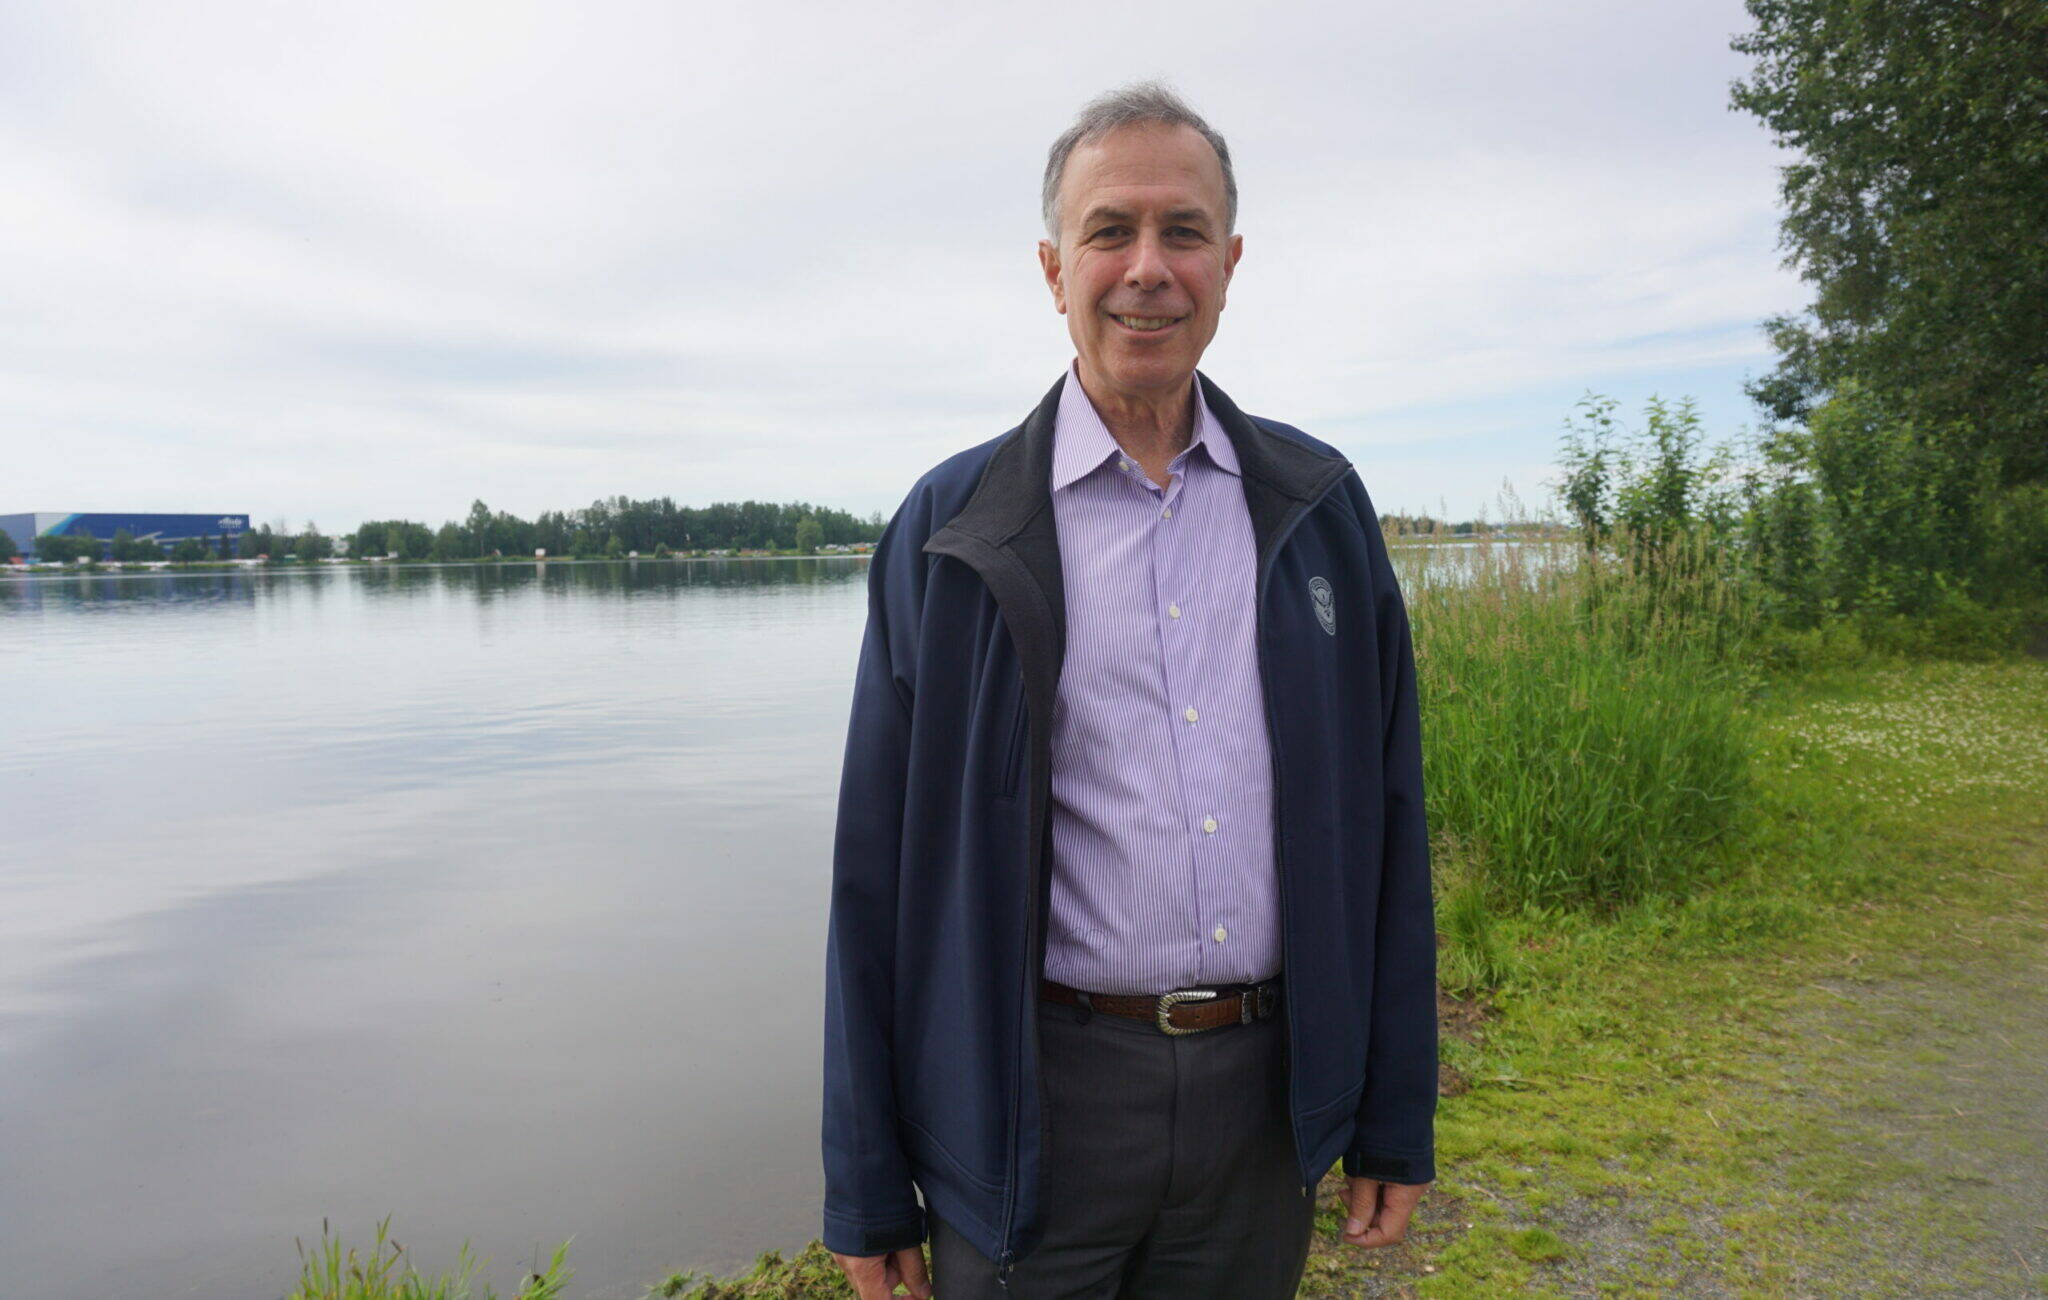 Dimitri Kusnezov, the U.S. Department of Homeland Security’s undersecretary for science and technology, stands by Lake Spenard on Tuesday. Kusnezov was on his first Alaska trip, with stops from Juneau to Utqiagvik. (Photo by Yereth Rosen/Alaska Beacon)